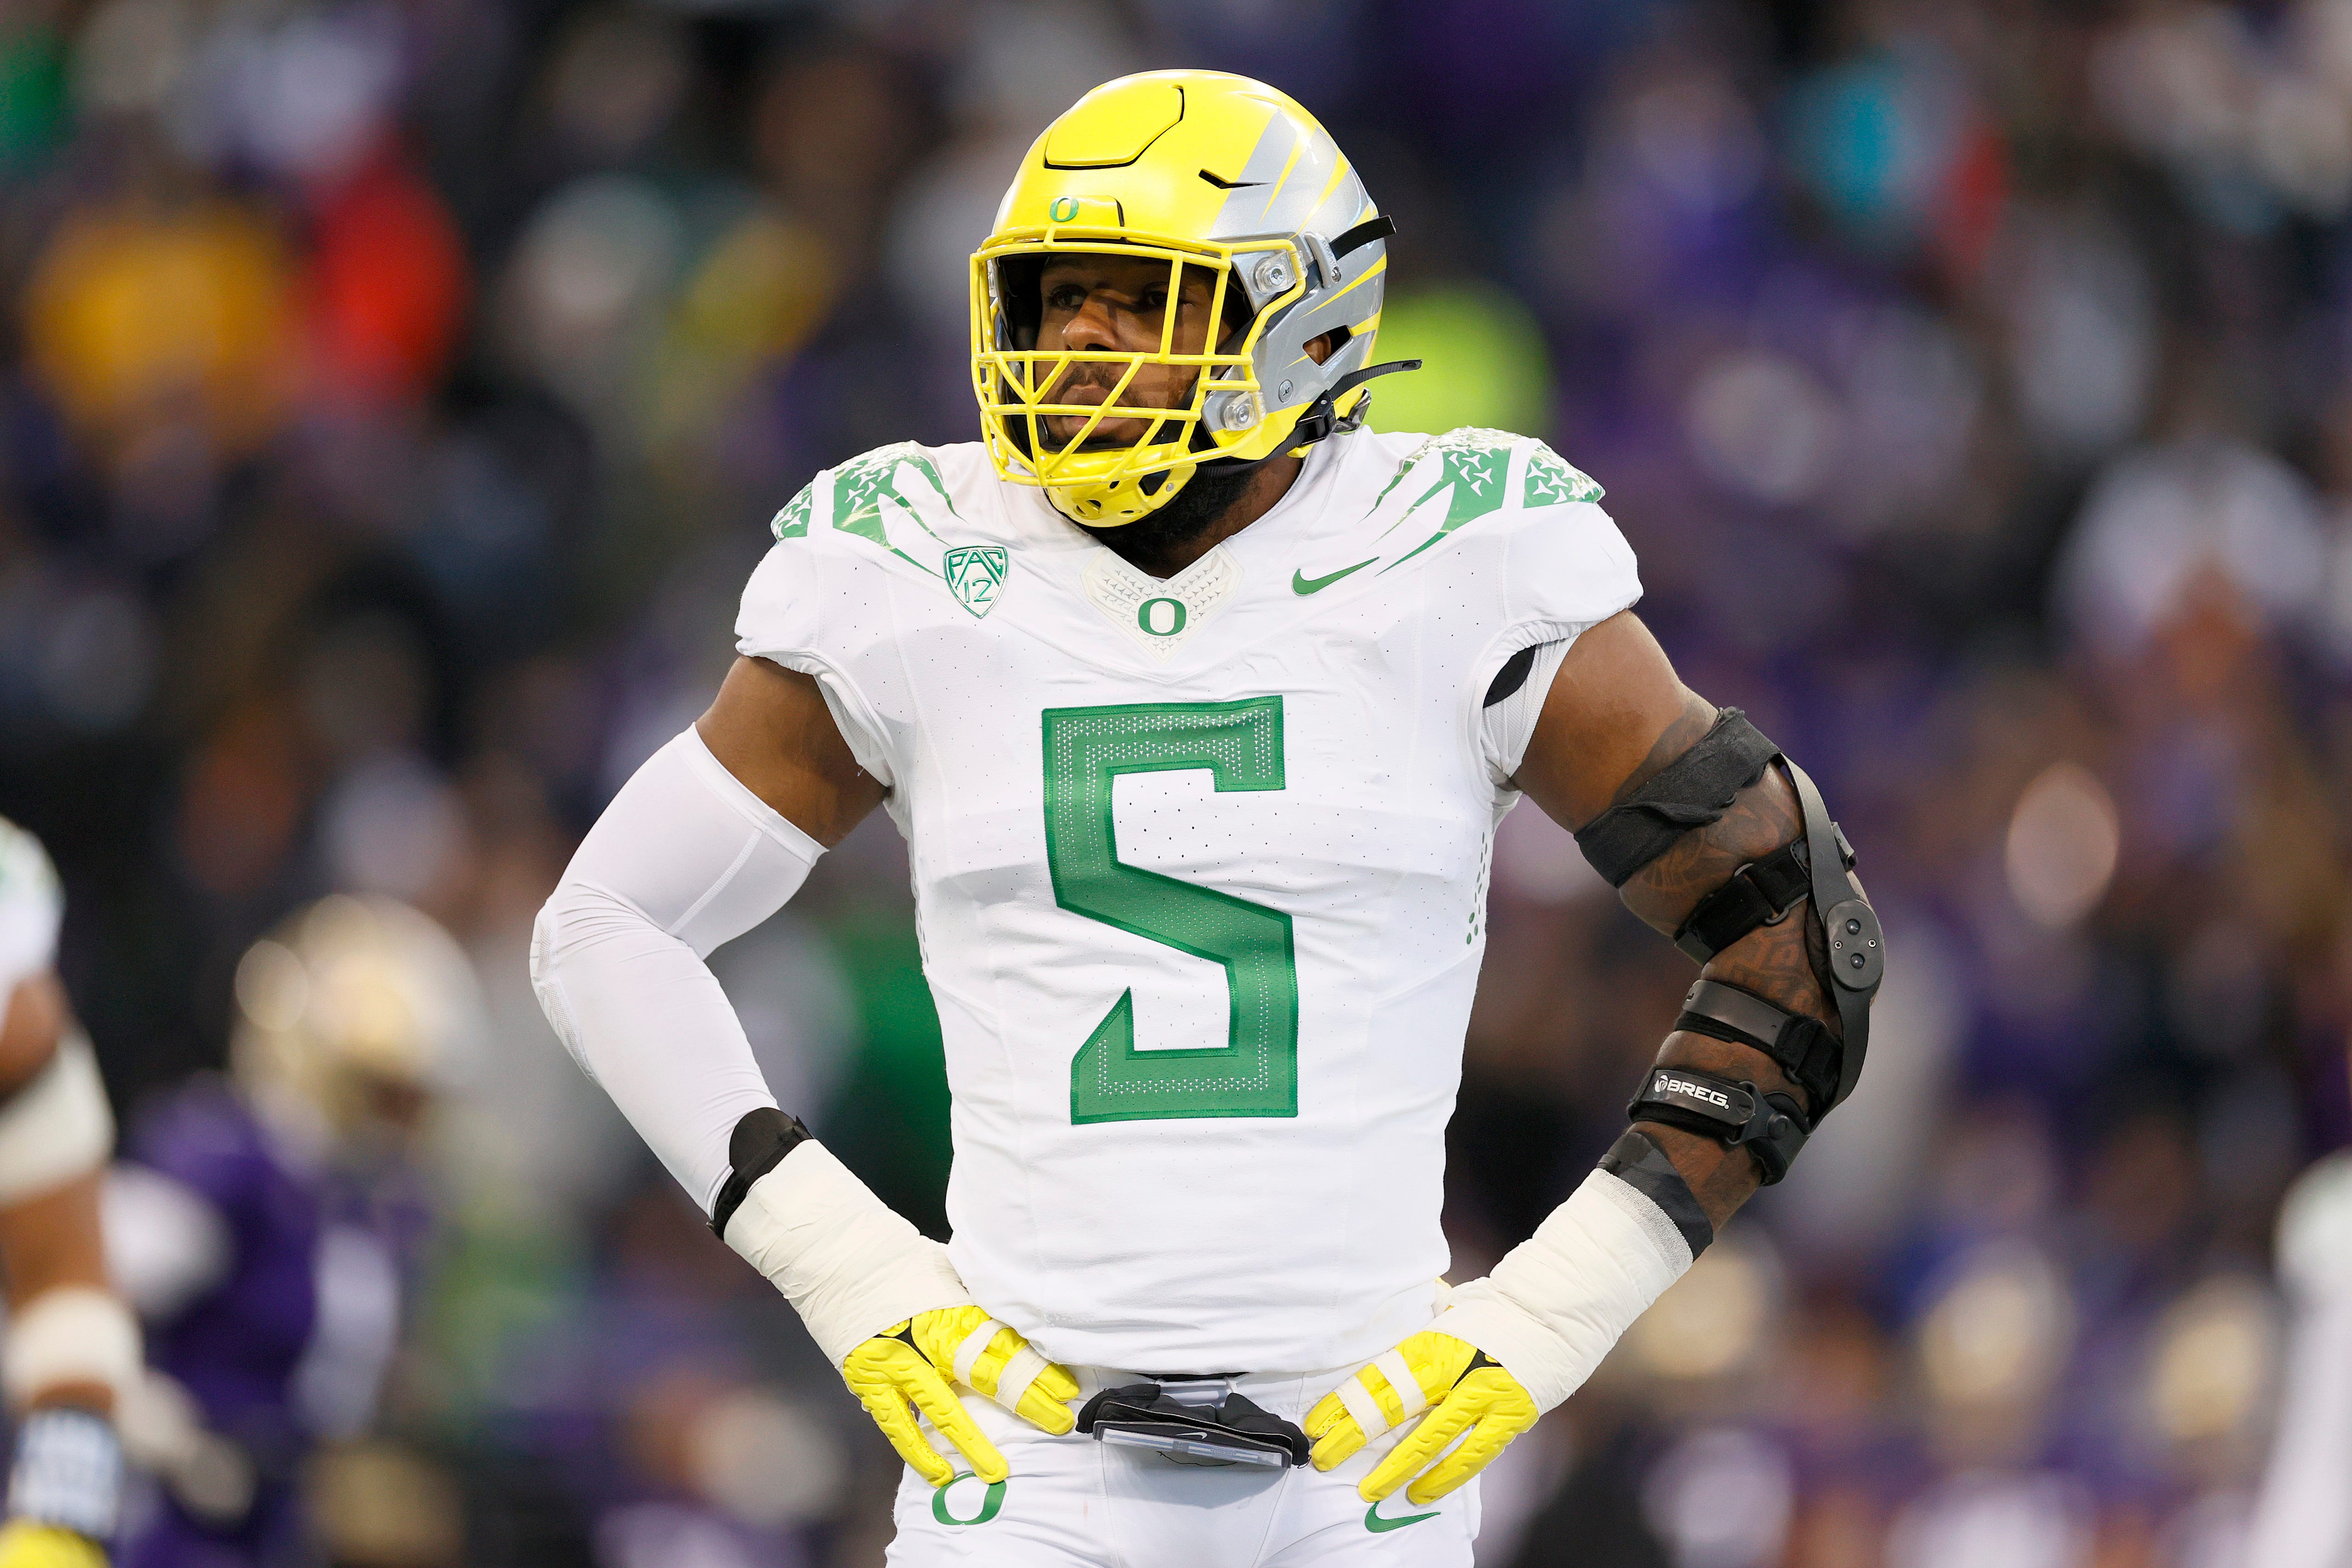 These are the Best Defensive Players in the NFL Draft, part 1! Do